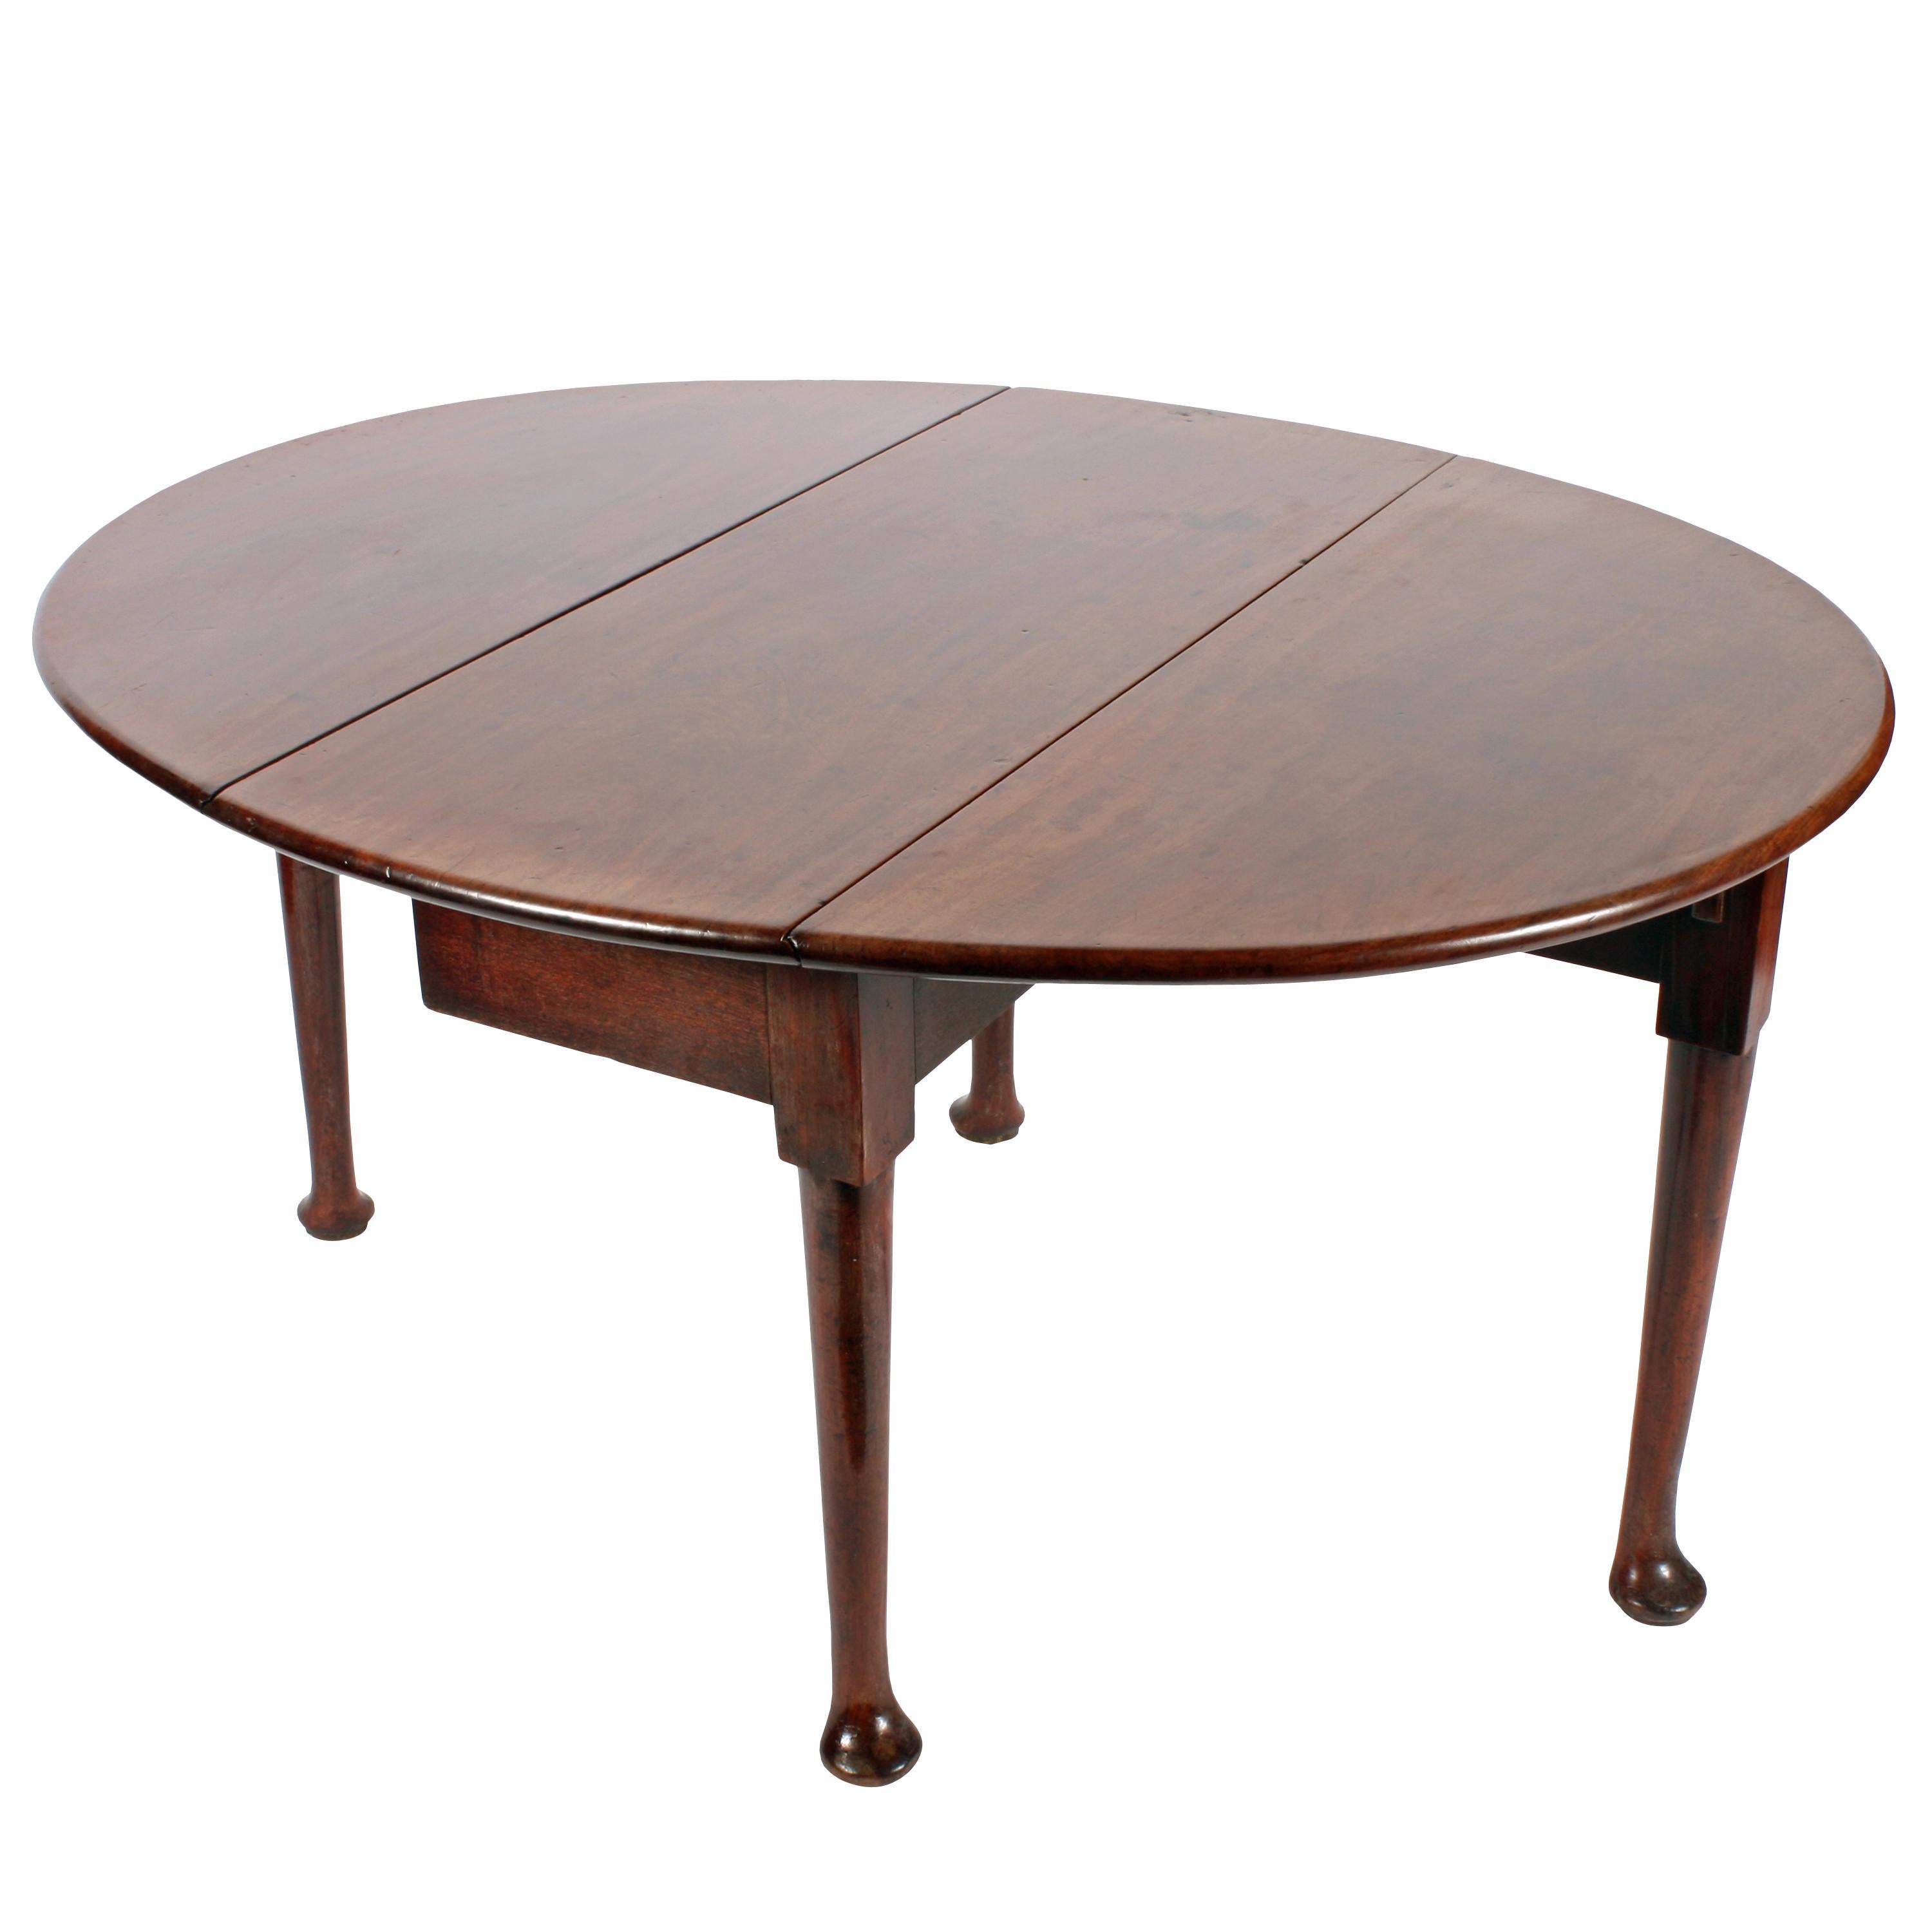 18th century pad foot drop-leaf table


An 18th century Georgian mahogany oval shaped drop-leaf dining table.

The table stands on four tapering turned legs with pad feet and one leg to each side gates open to support the leaves.

The table